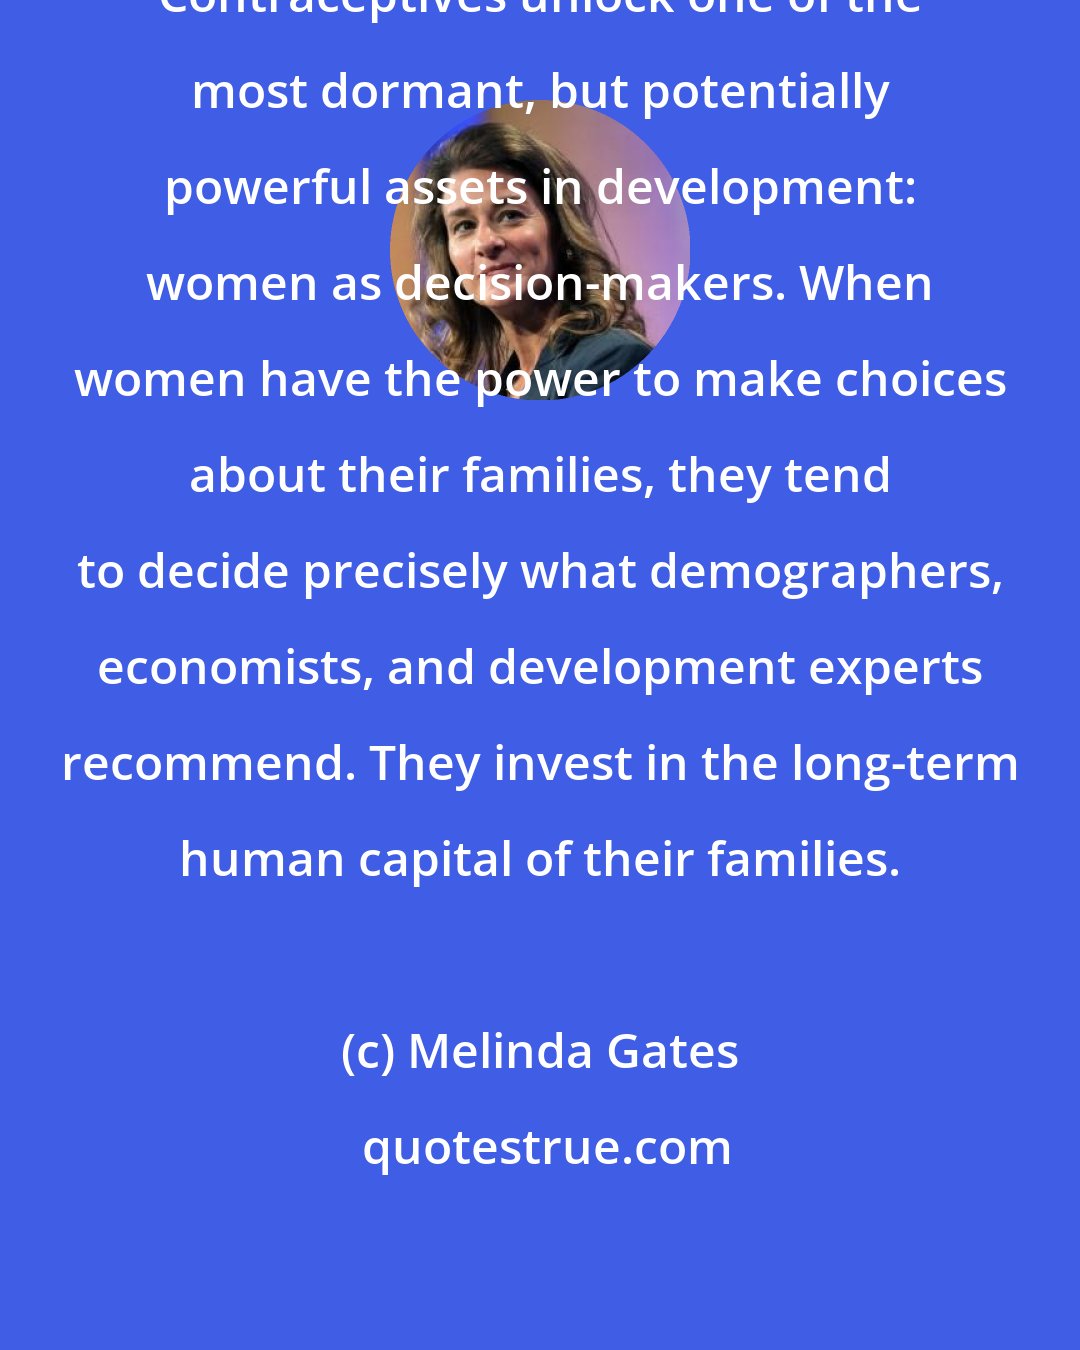 Melinda Gates: Contraceptives unlock one of the most dormant, but potentially powerful assets in development: women as decision-makers. When women have the power to make choices about their families, they tend to decide precisely what demographers, economists, and development experts recommend. They invest in the long-term human capital of their families.